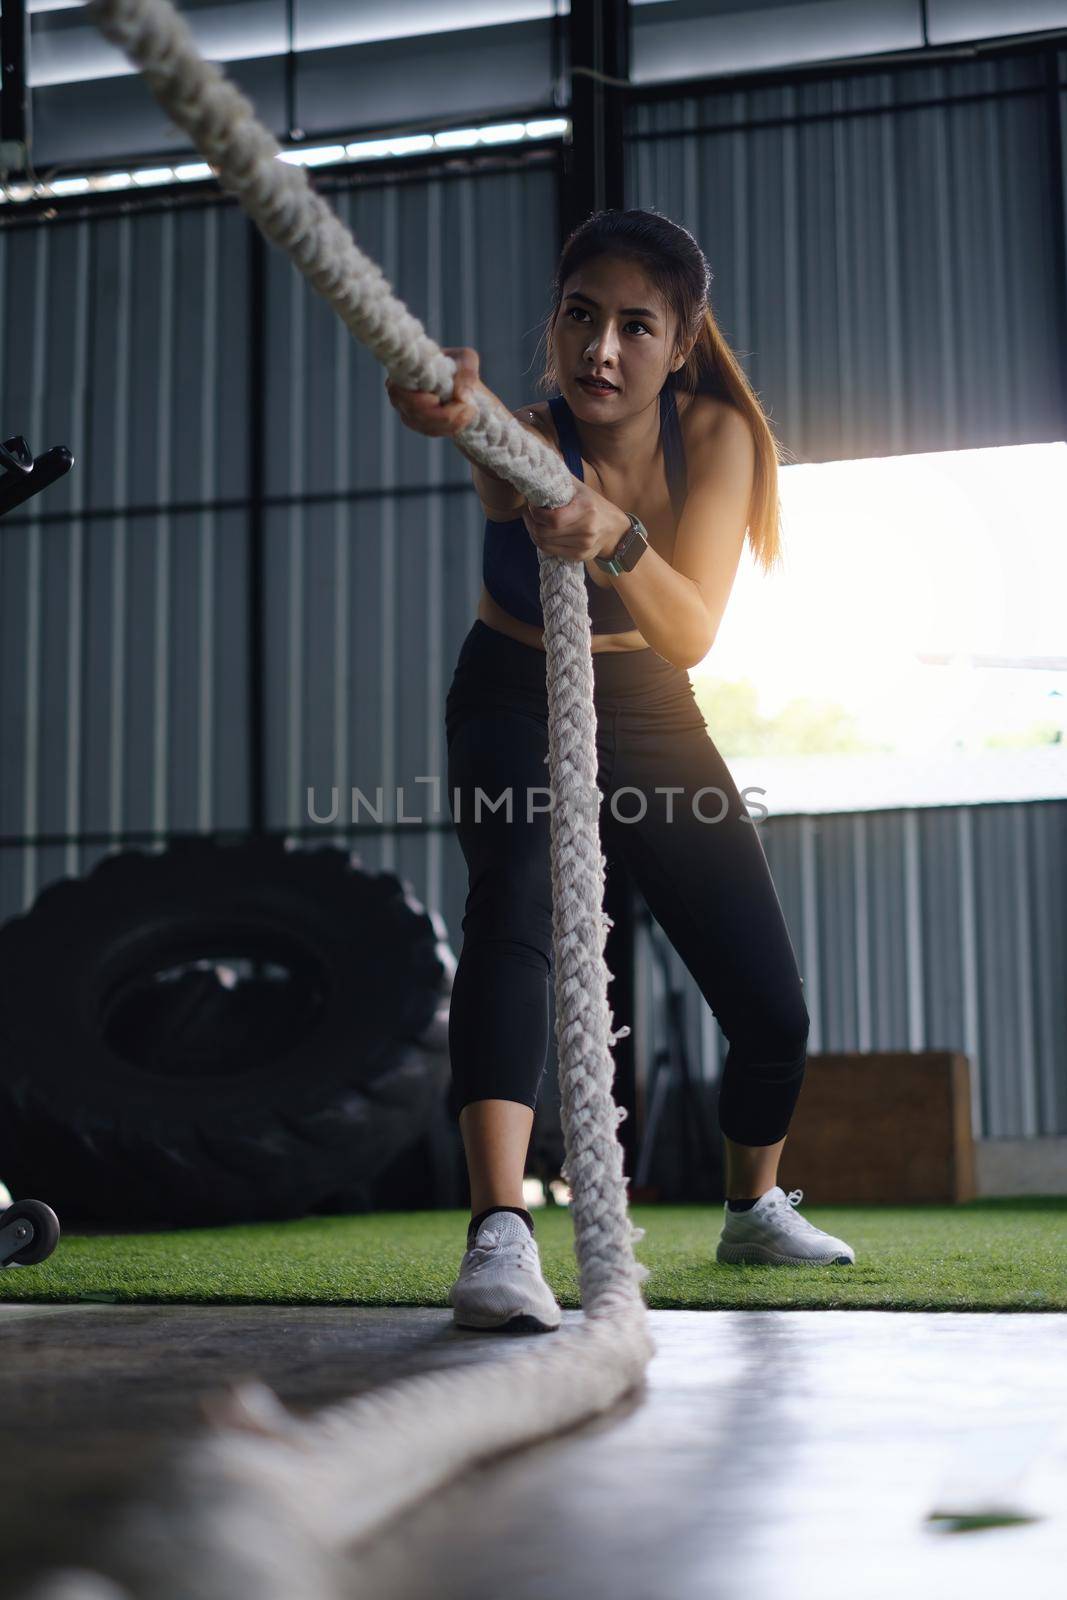 Female working out with battling rope at gym. Healthy modern people concept.